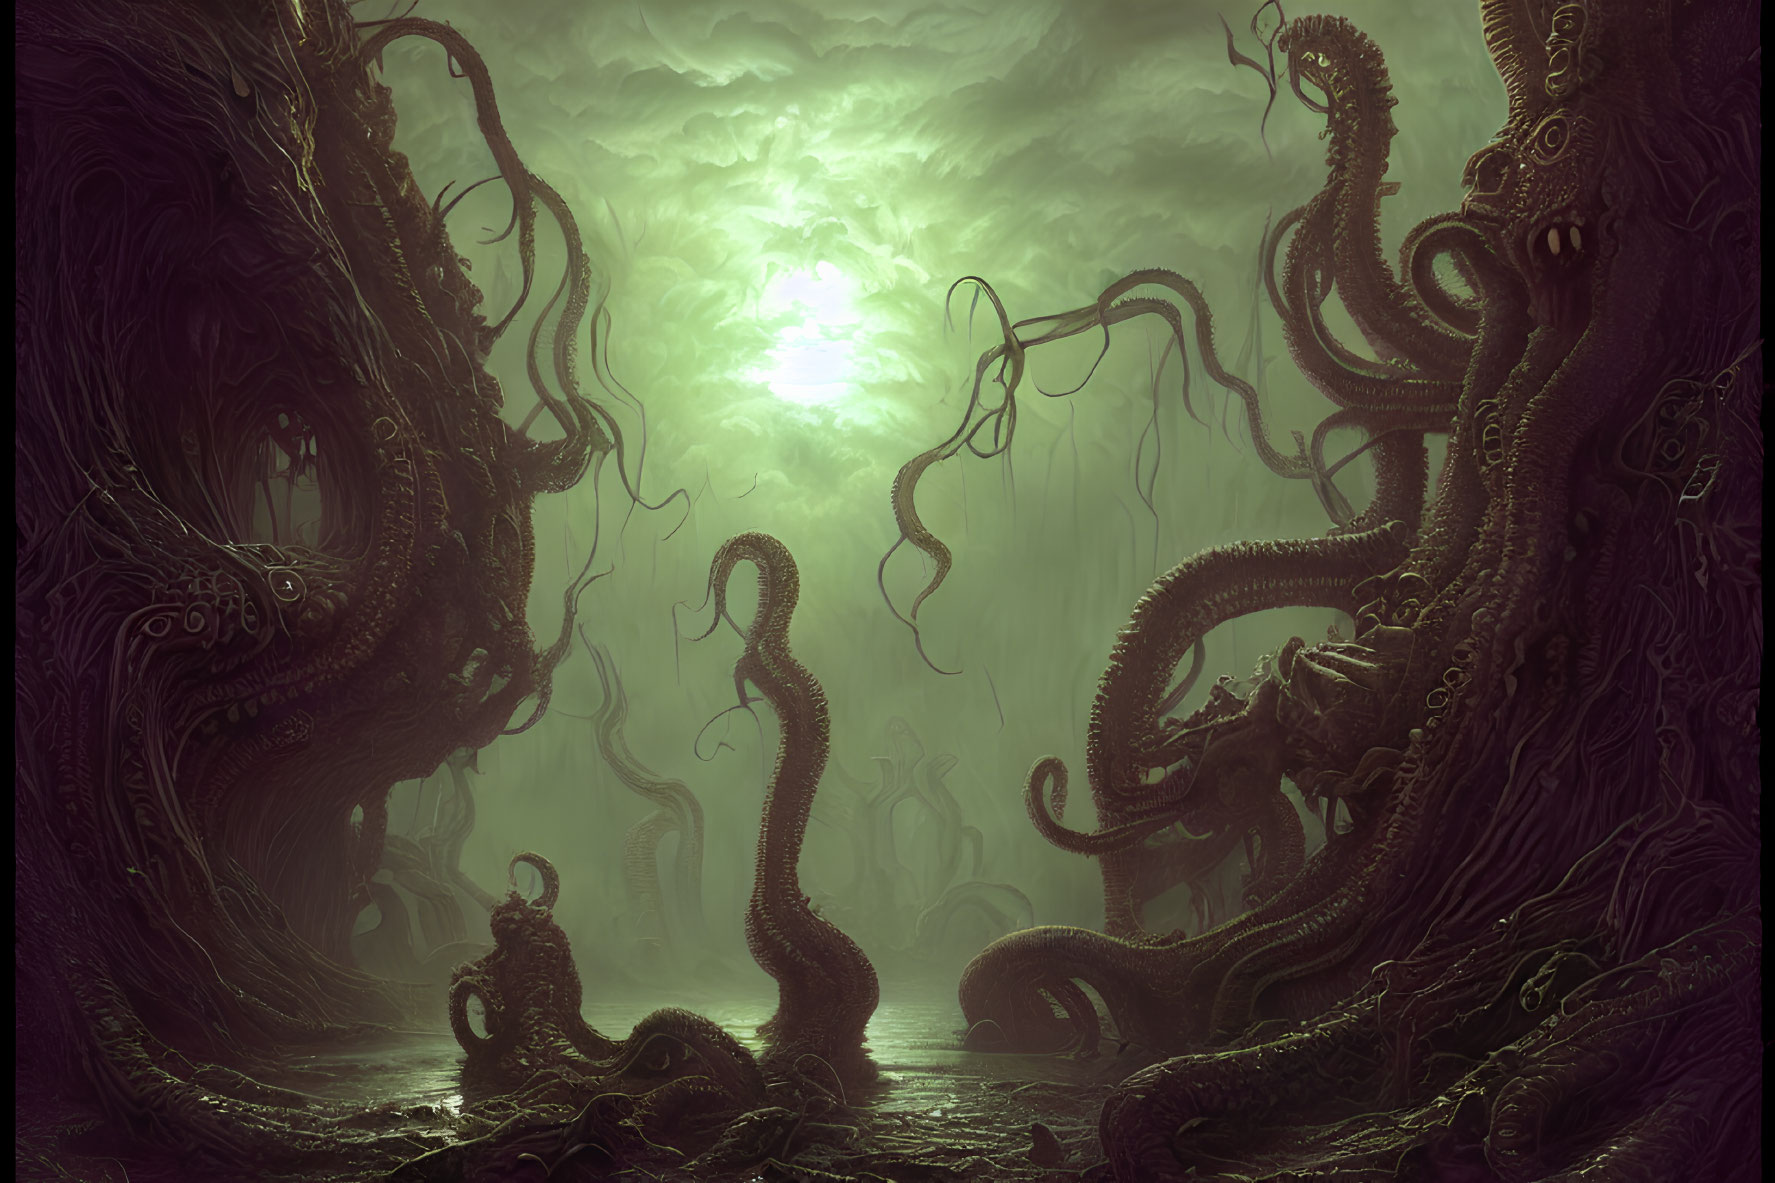 Eerie landscape with tentacle-like structures under green sky